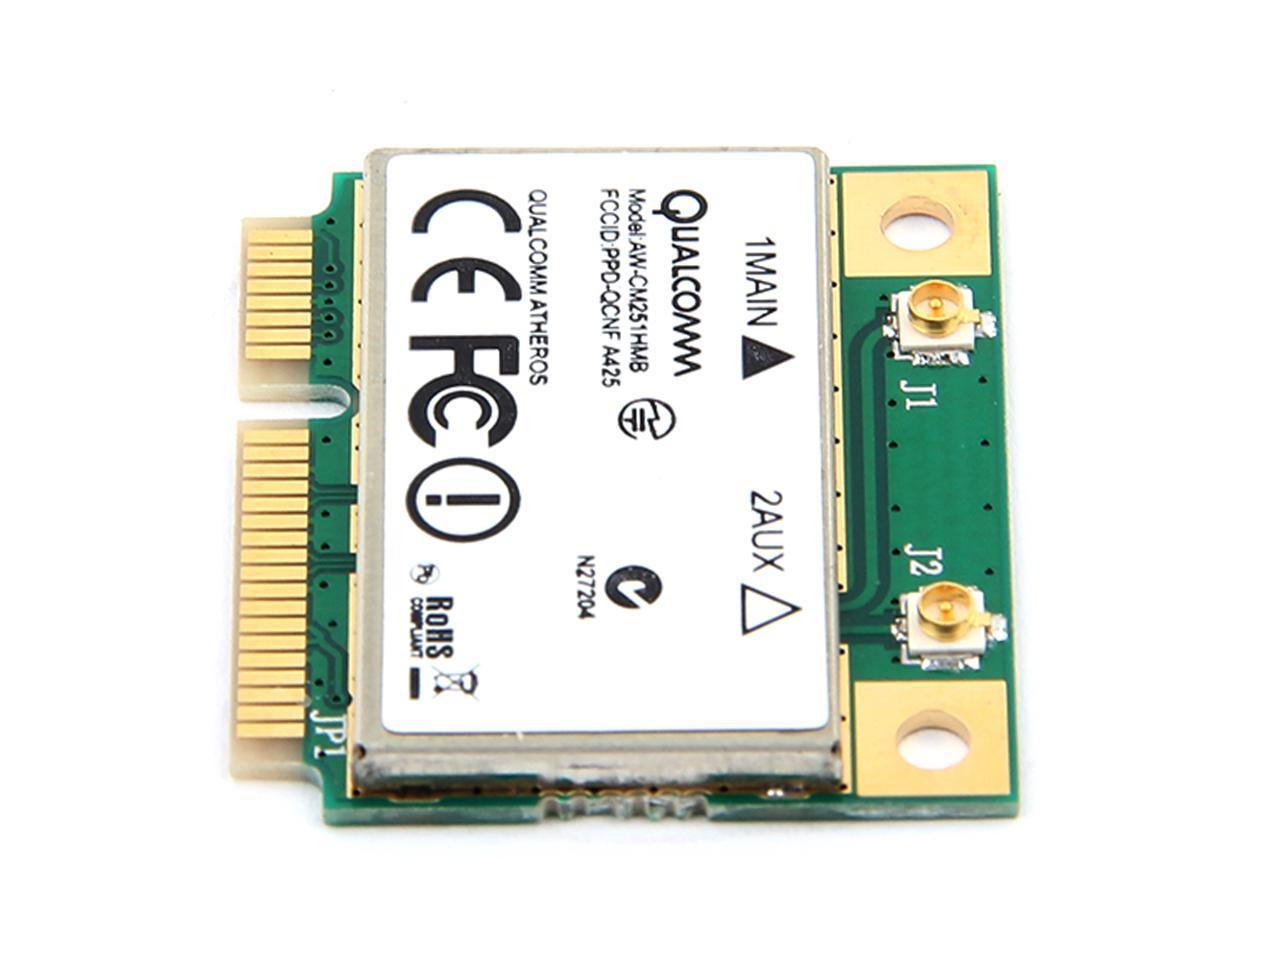 download qualcomm atheros drivers ar5009